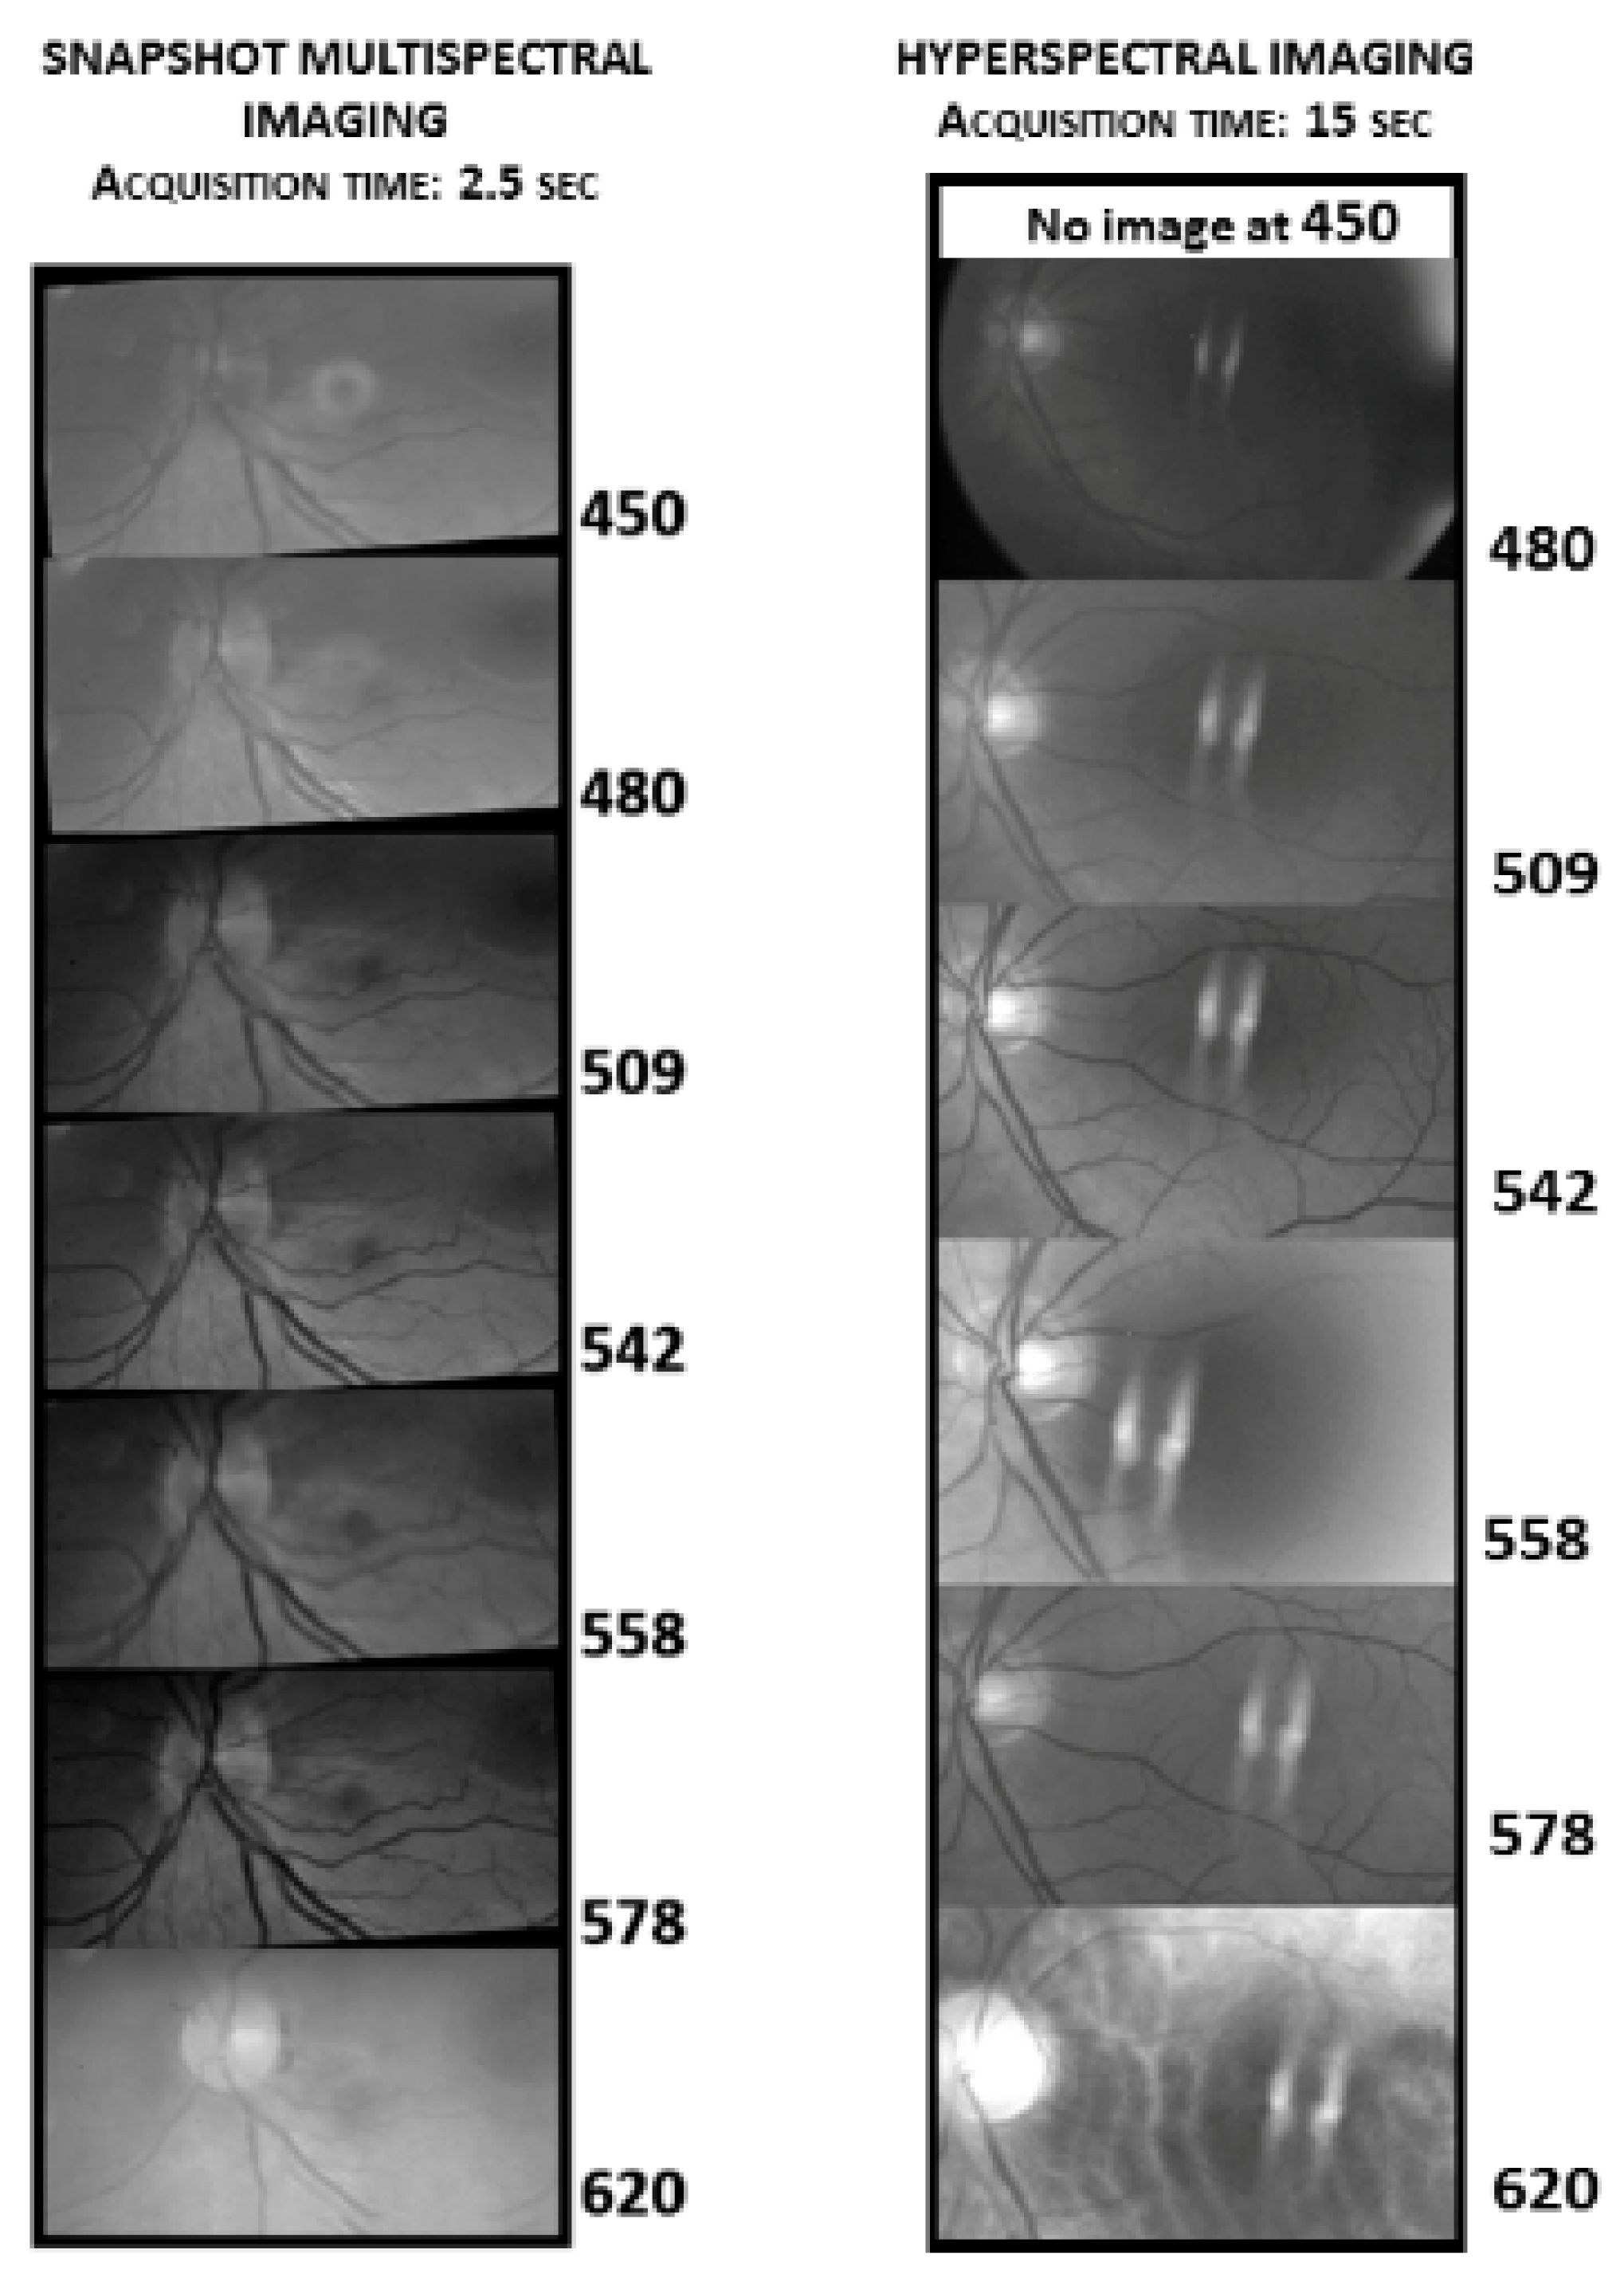 Instruments Free Full Text Functional Imaging Of The Ocular Fundus Using An 8 Band Retinal Multispectral Imaging System Html